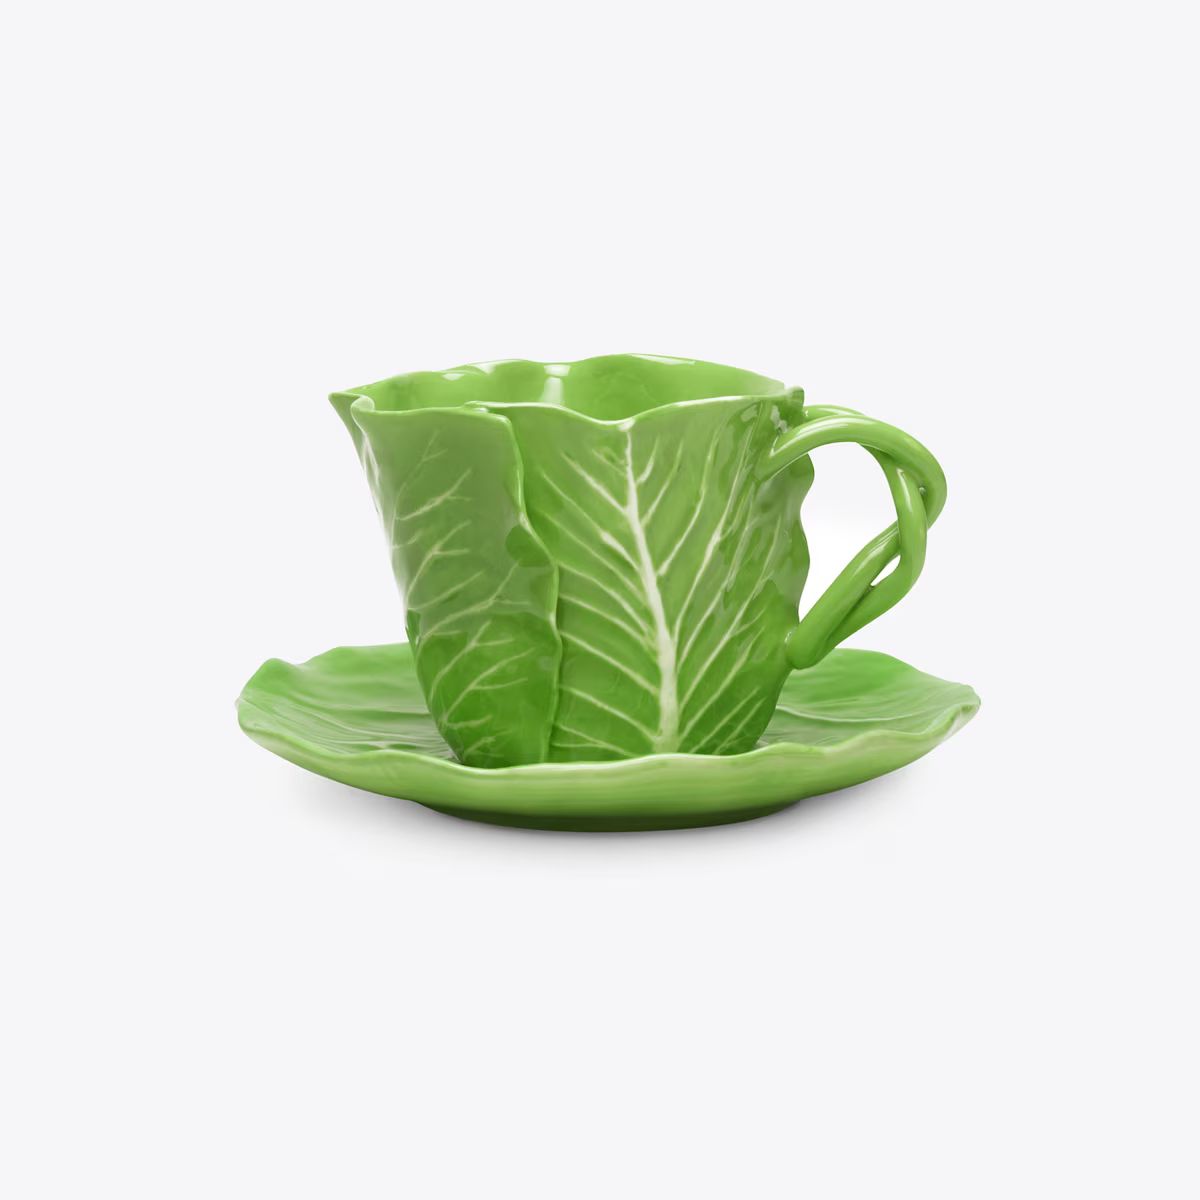 Lettuce Ware Cup & Saucer, Set of 2: Women's Designer Tabletop & Drinkware | Tory Burch | Tory Burch (US)